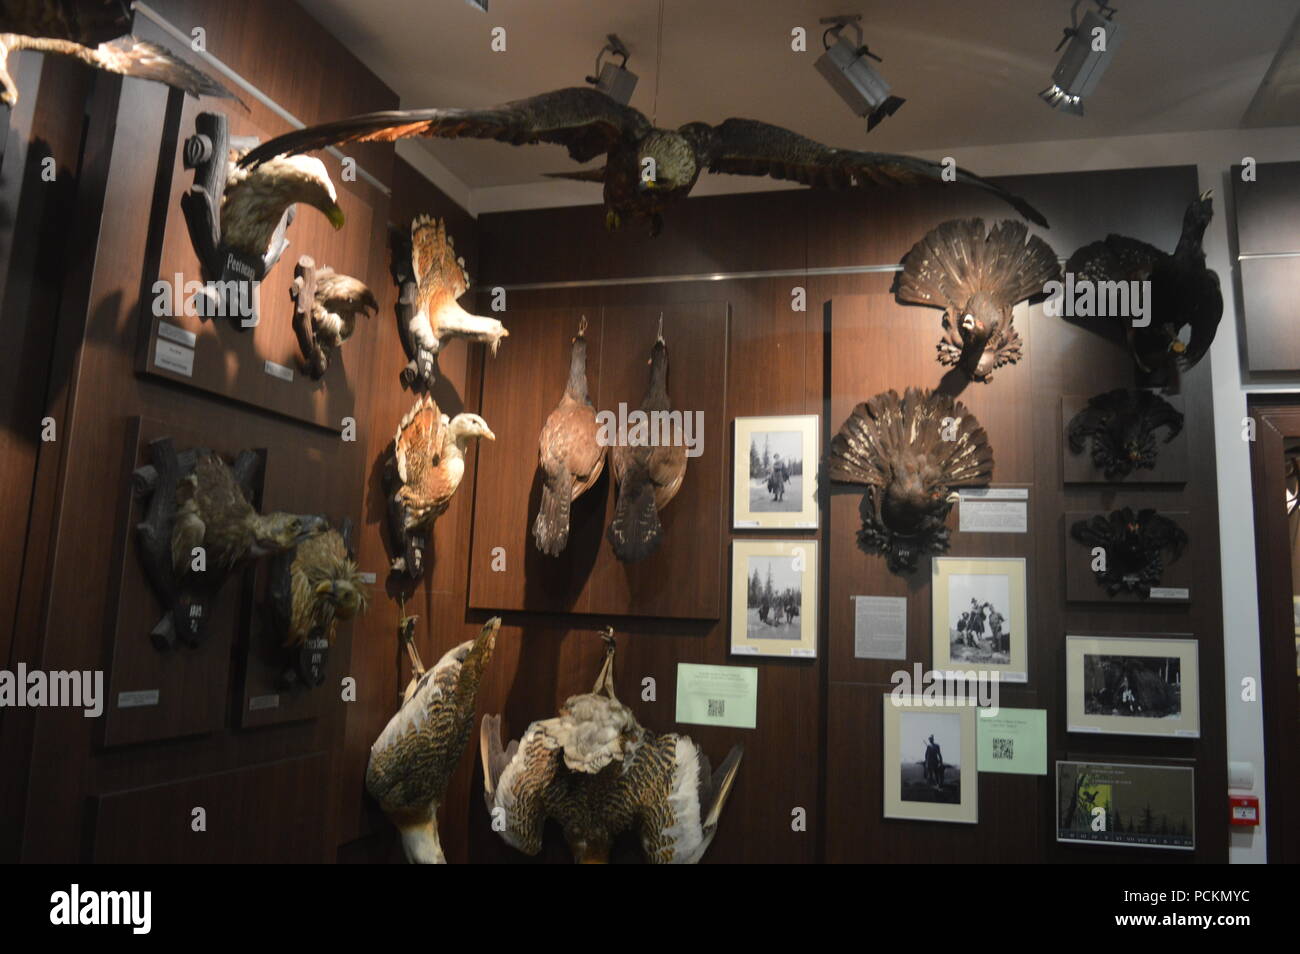 The 'august von spiess' museum of hunting Stock Photo